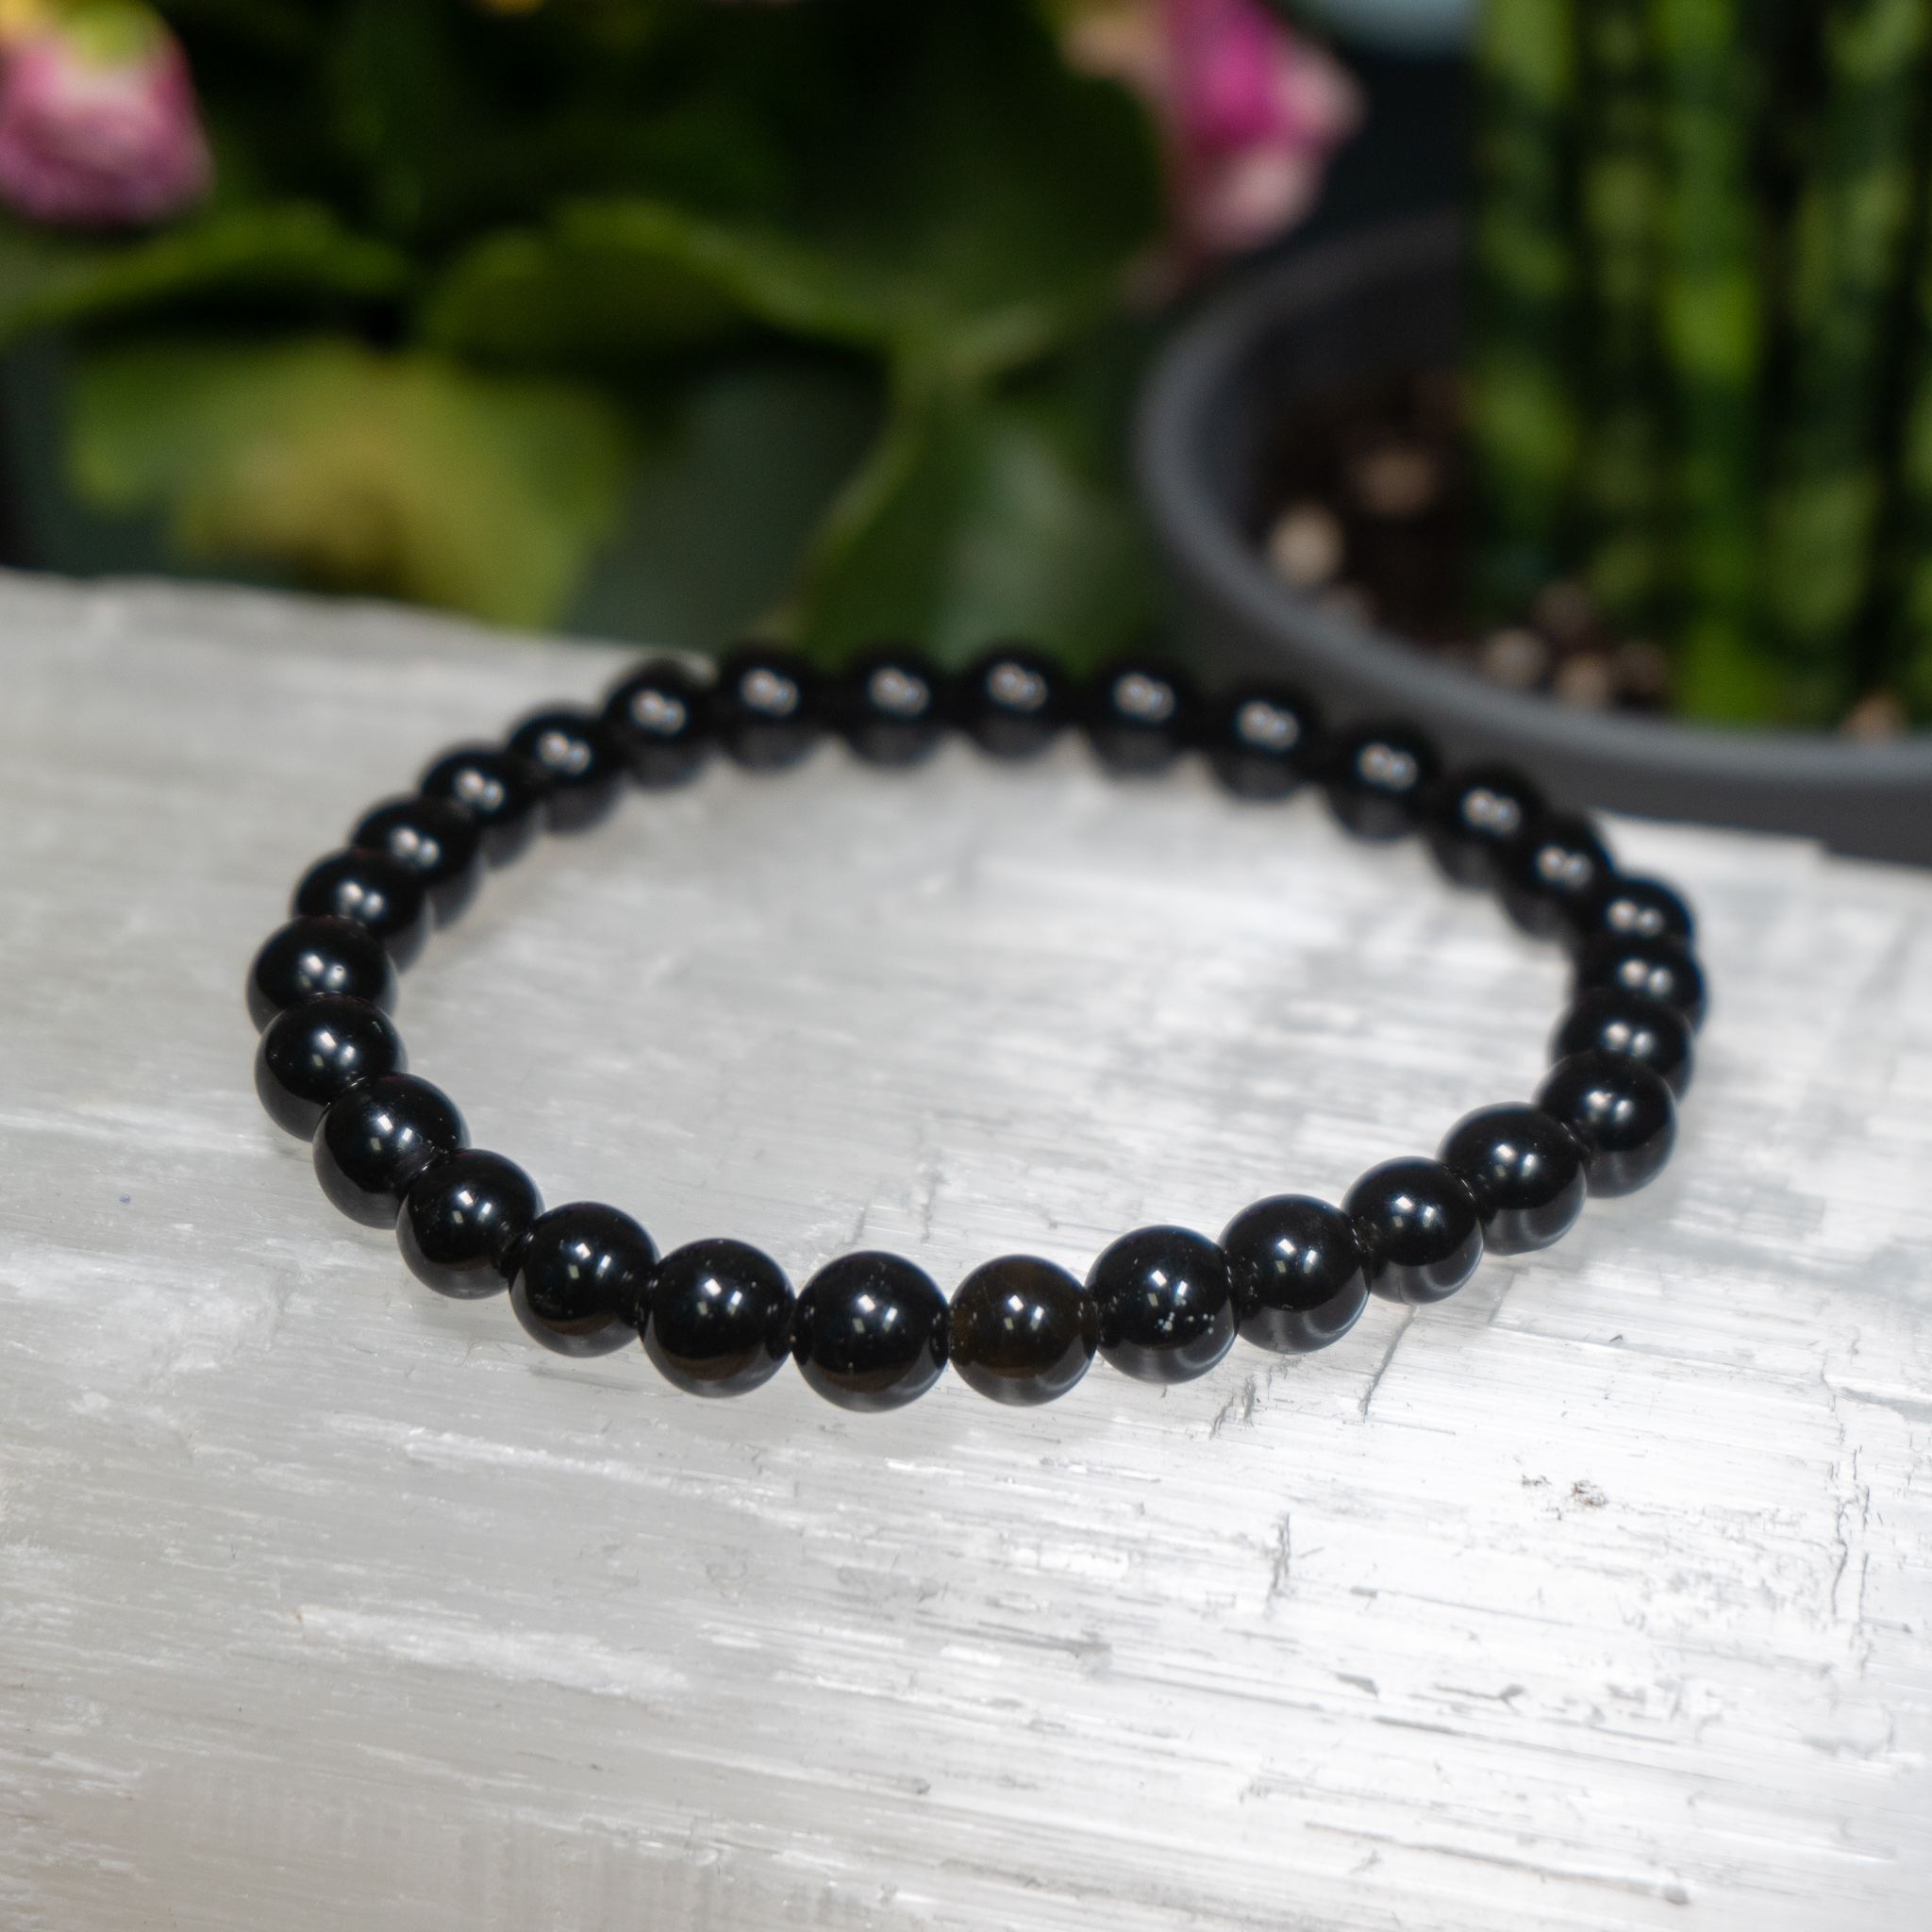 7 Things You Need To Know About Onyx Gemstone Before You Buy   PlayHardLookDope